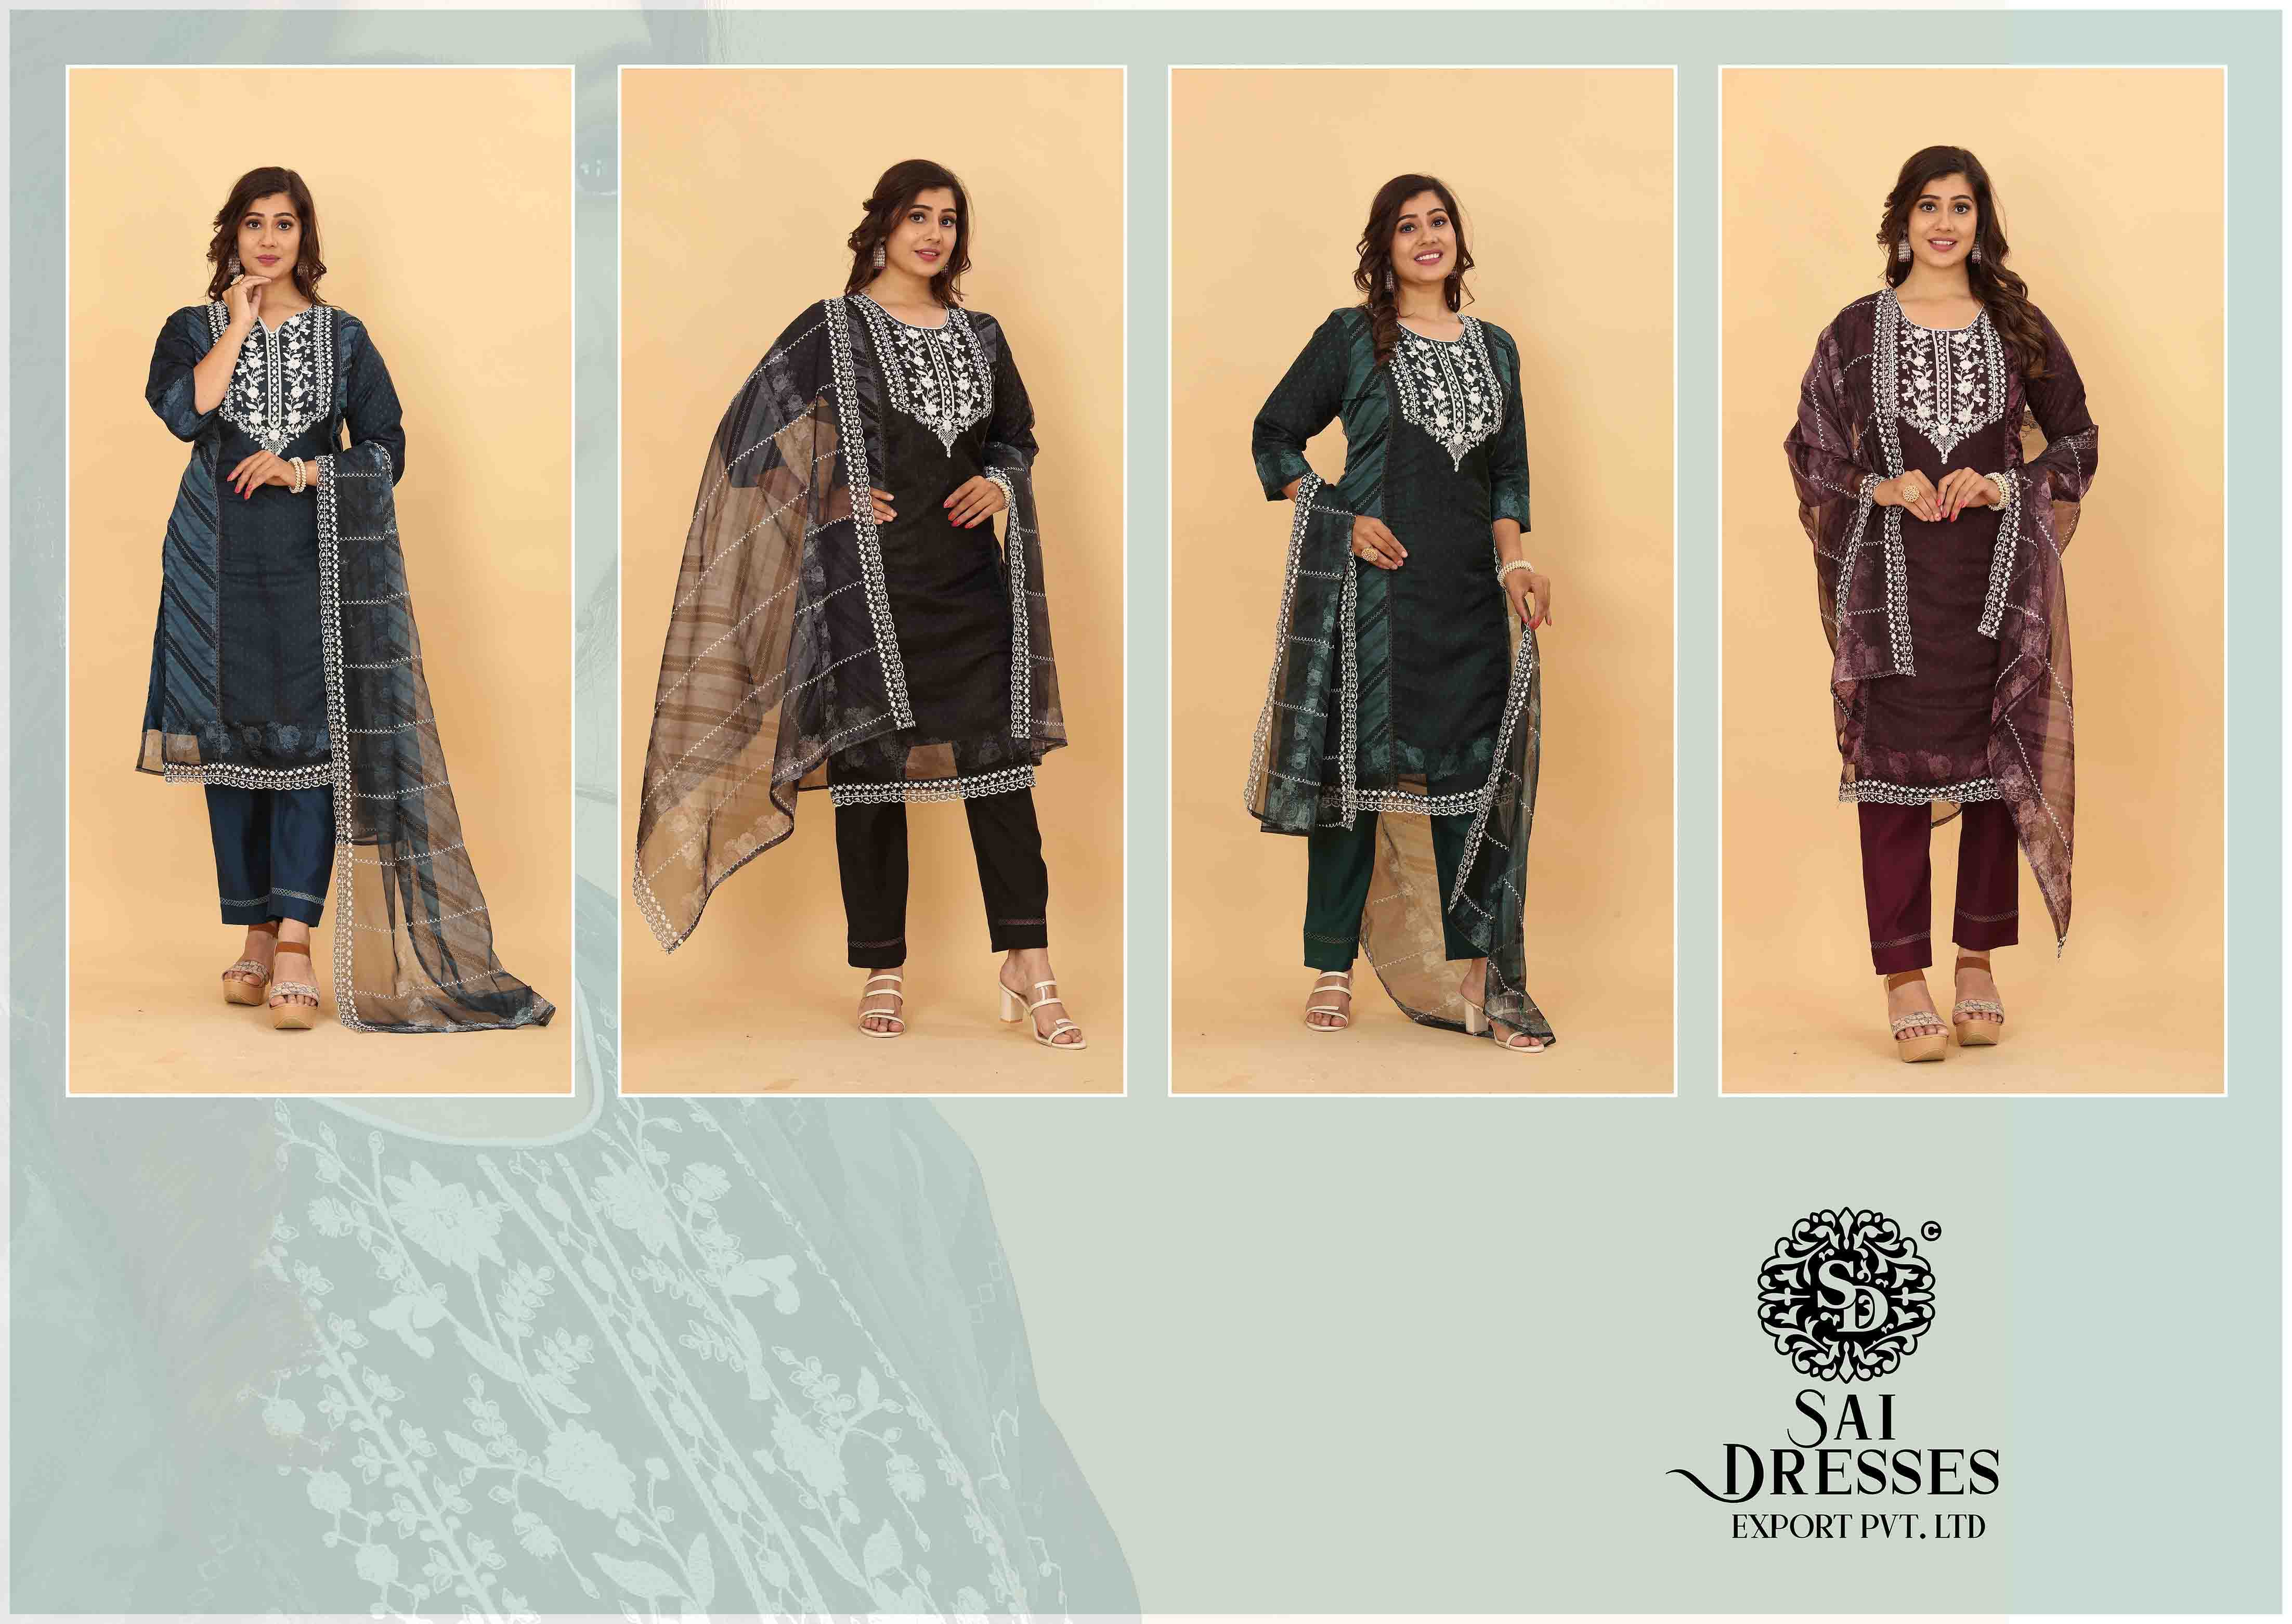 SAI DRESSES PRESENT D.NO SD1032 TO SD1035 READY TO EXCLUSIVE FESTIVE WEAR DESIGNER PAKISTANI 3 PIECE CONCEPT COMBO COLLECTION IN WHOLESALE RATE IN SURAT